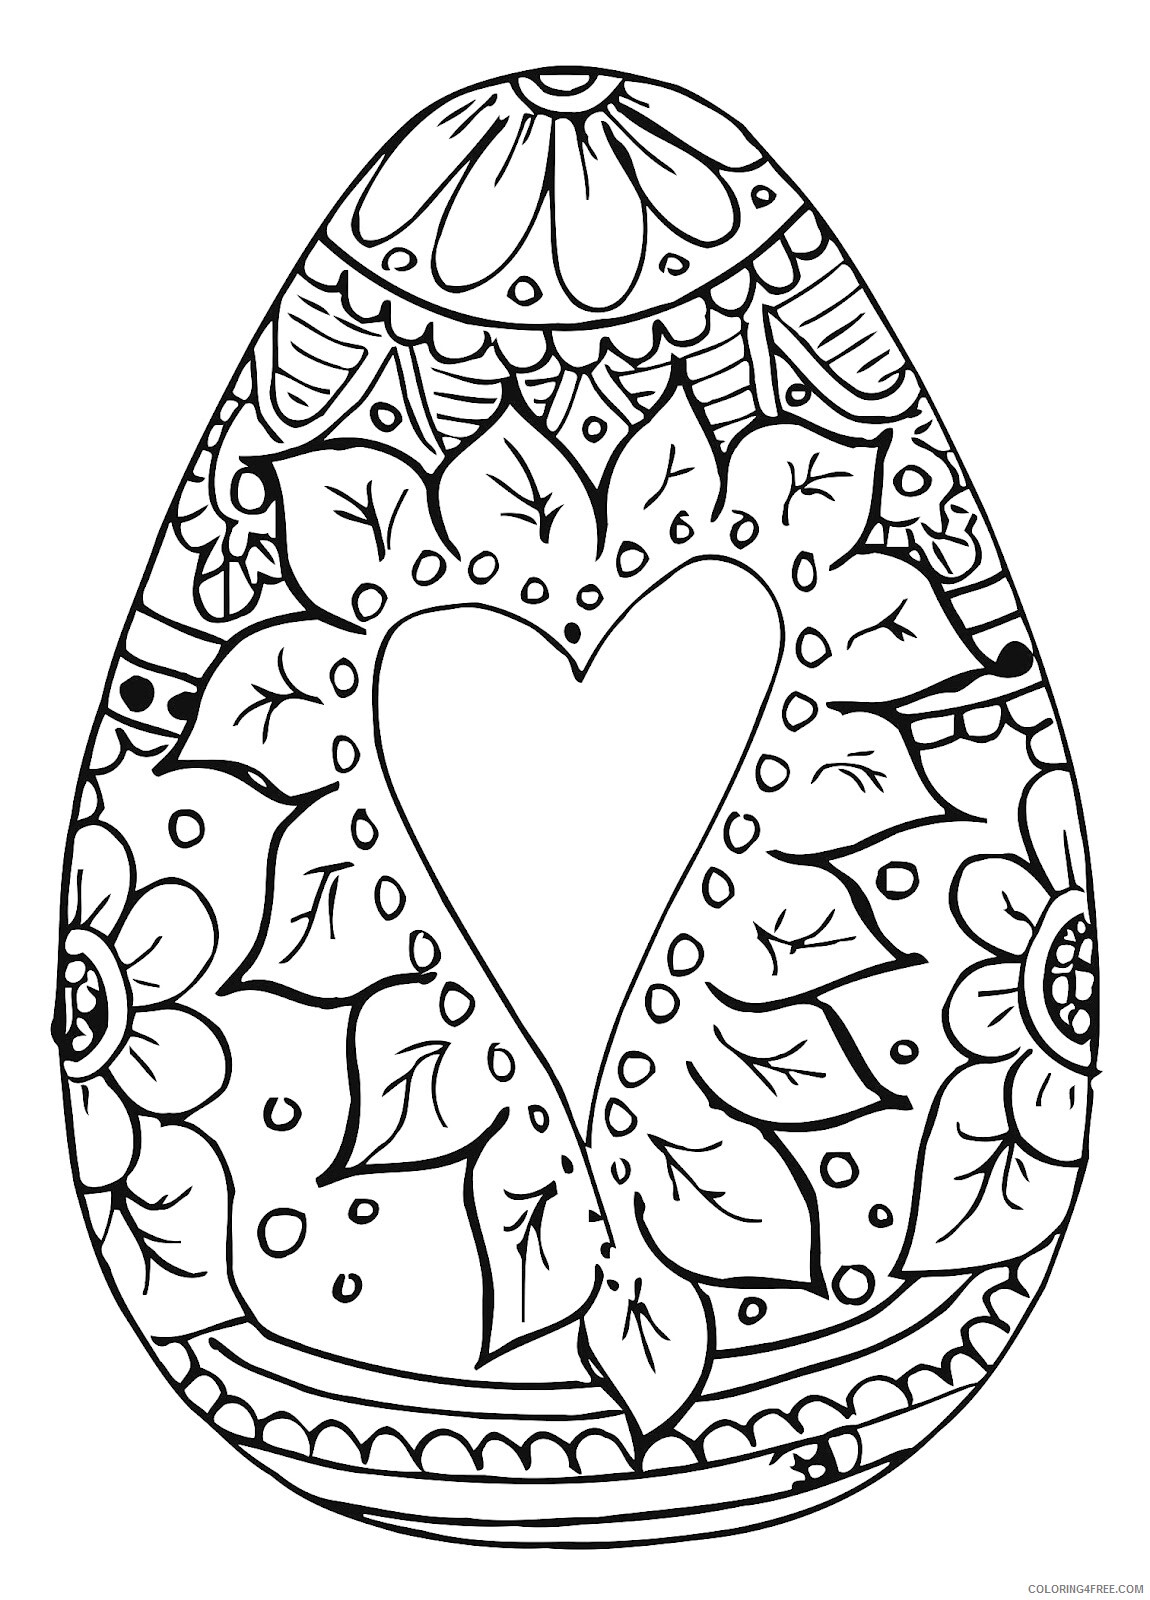 Adult Heart Coloring Pages Easter Egg with Heart for Adults Printable 2021 0045 Coloring4free